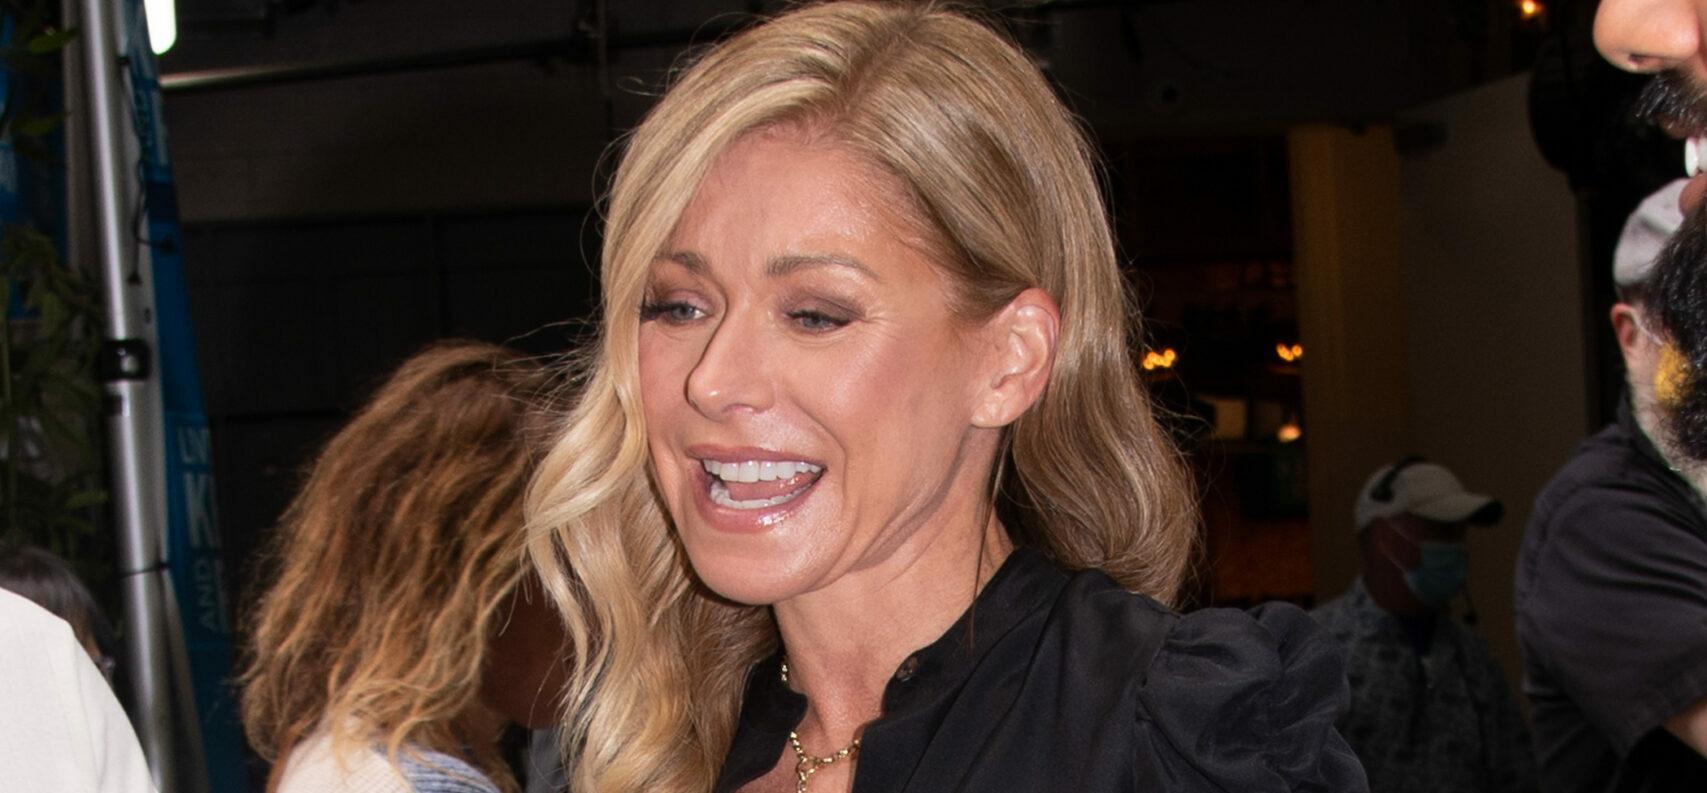 Kelly Ripa Isn't Bothered By Kathy Lee Gifford's Book Comments